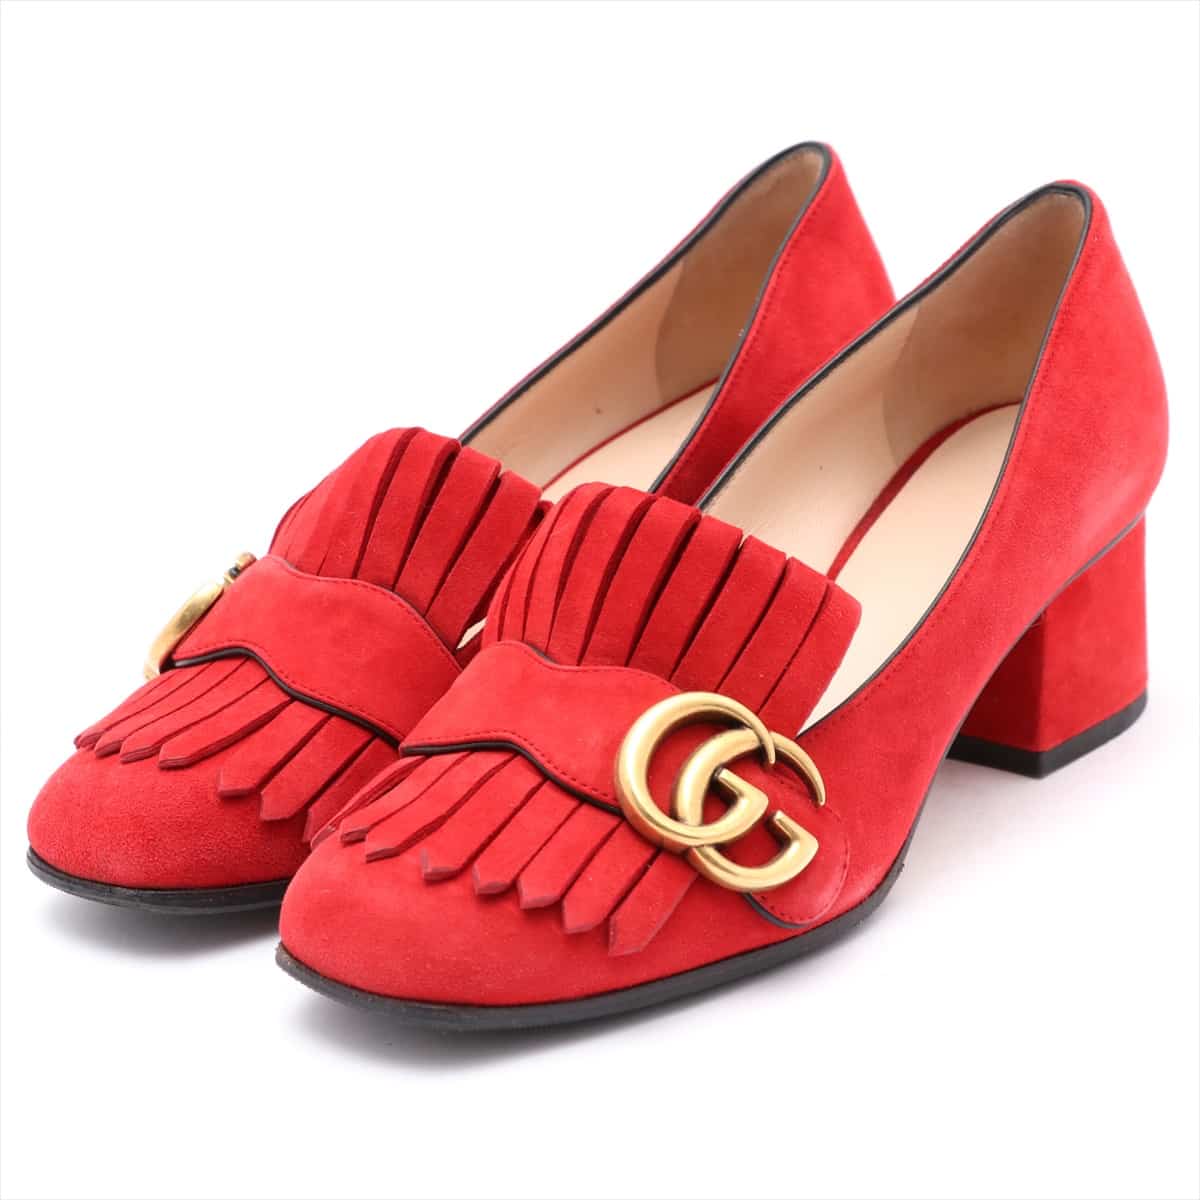 Gucci GG Marmont Suede Pumps 35 Ladies' Red